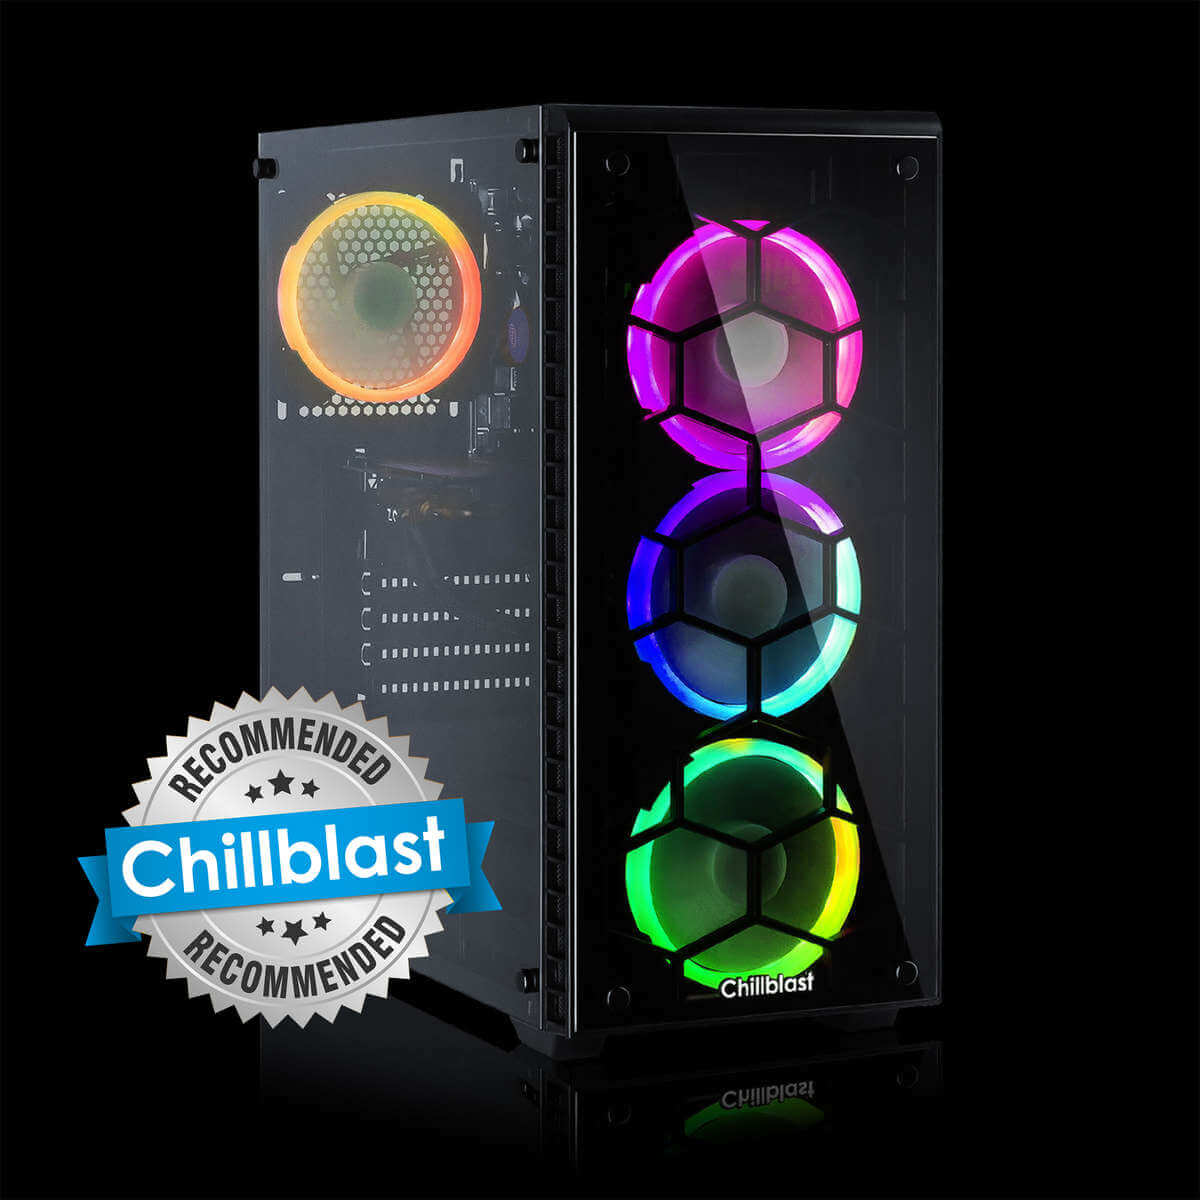 Image of the Chillblast Fusion RTX 2060 Super Custom Gaming PC against a black background